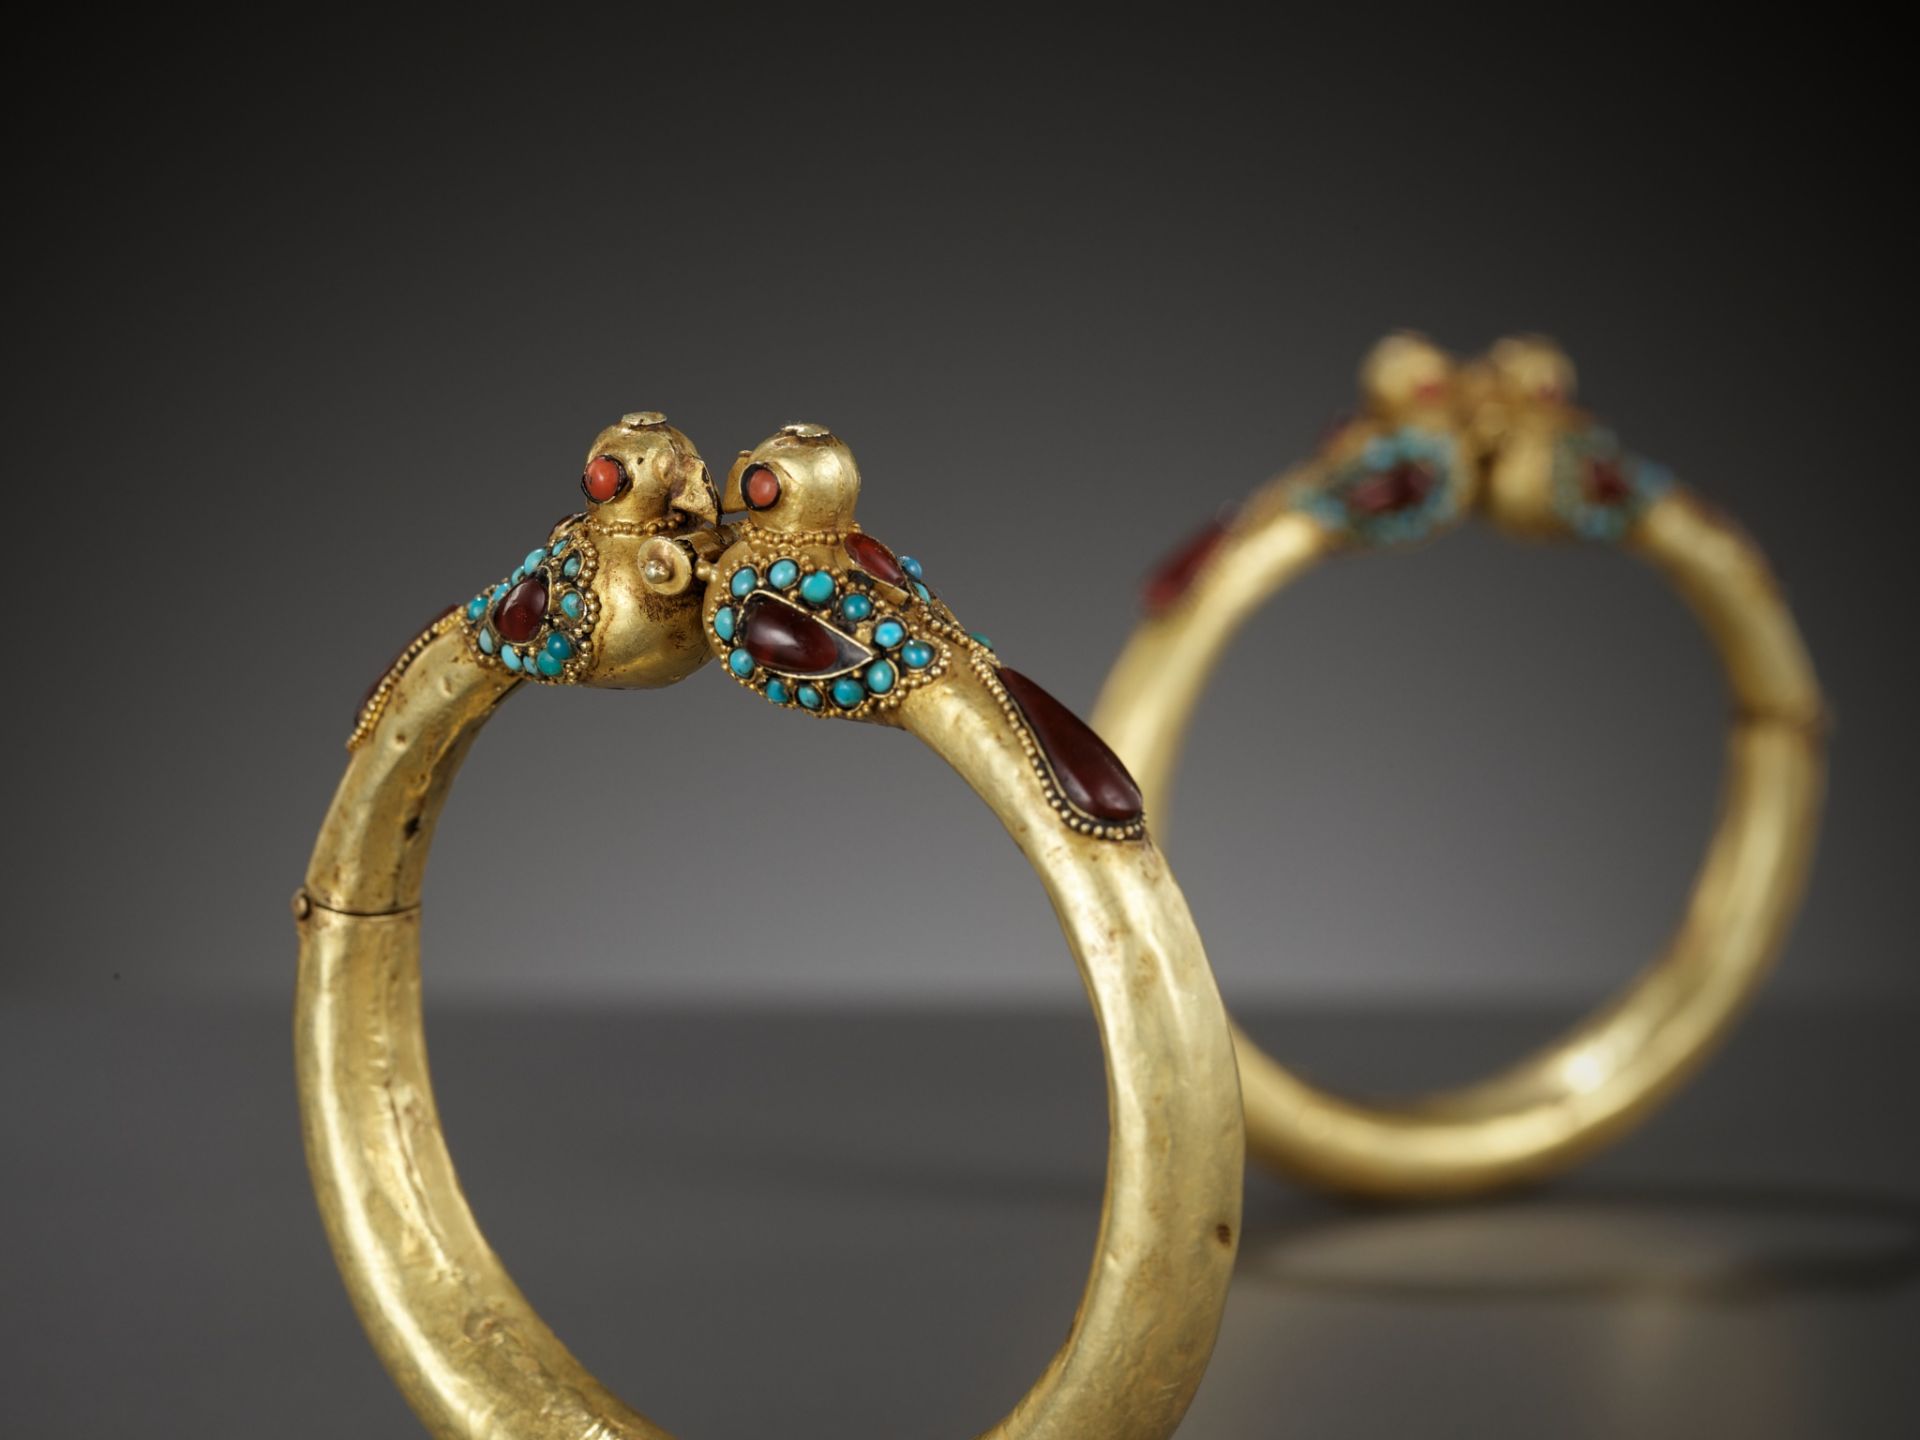 A PAIR OF GOLD 'BIRD' BANGLES, PERSIA, 11TH TO 12TH CENTURY